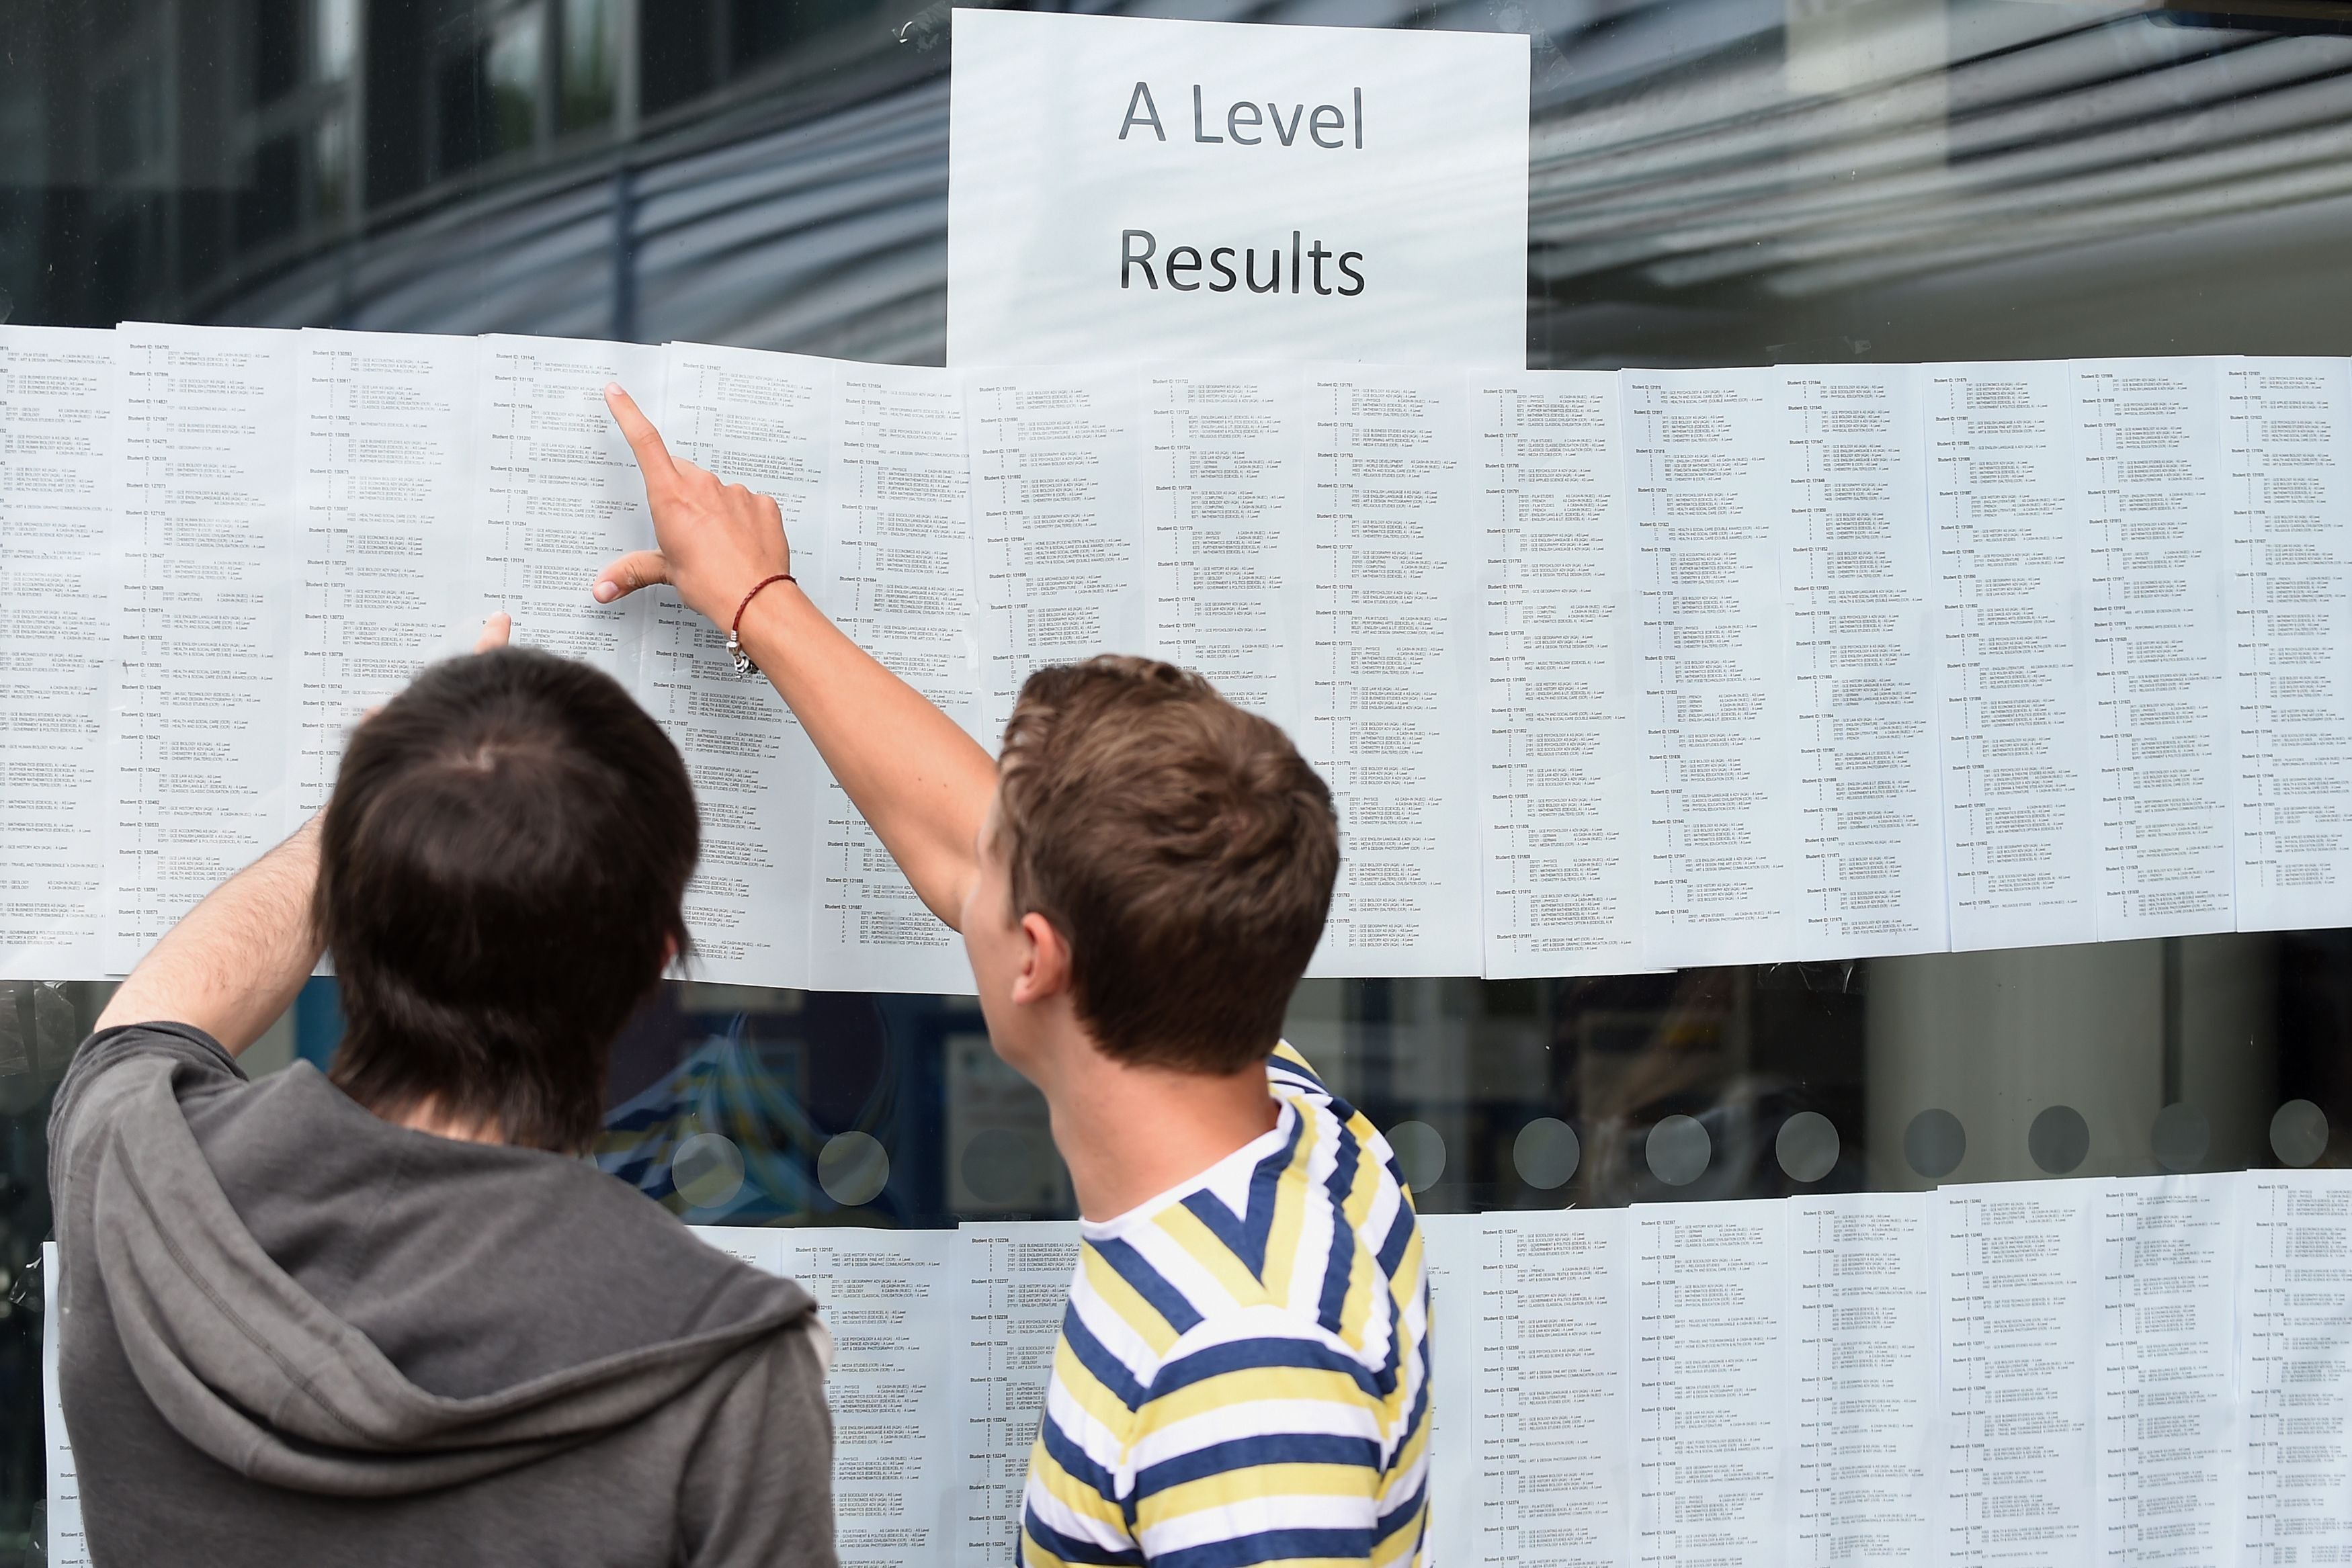 A-level students are due to get their results on 17 August